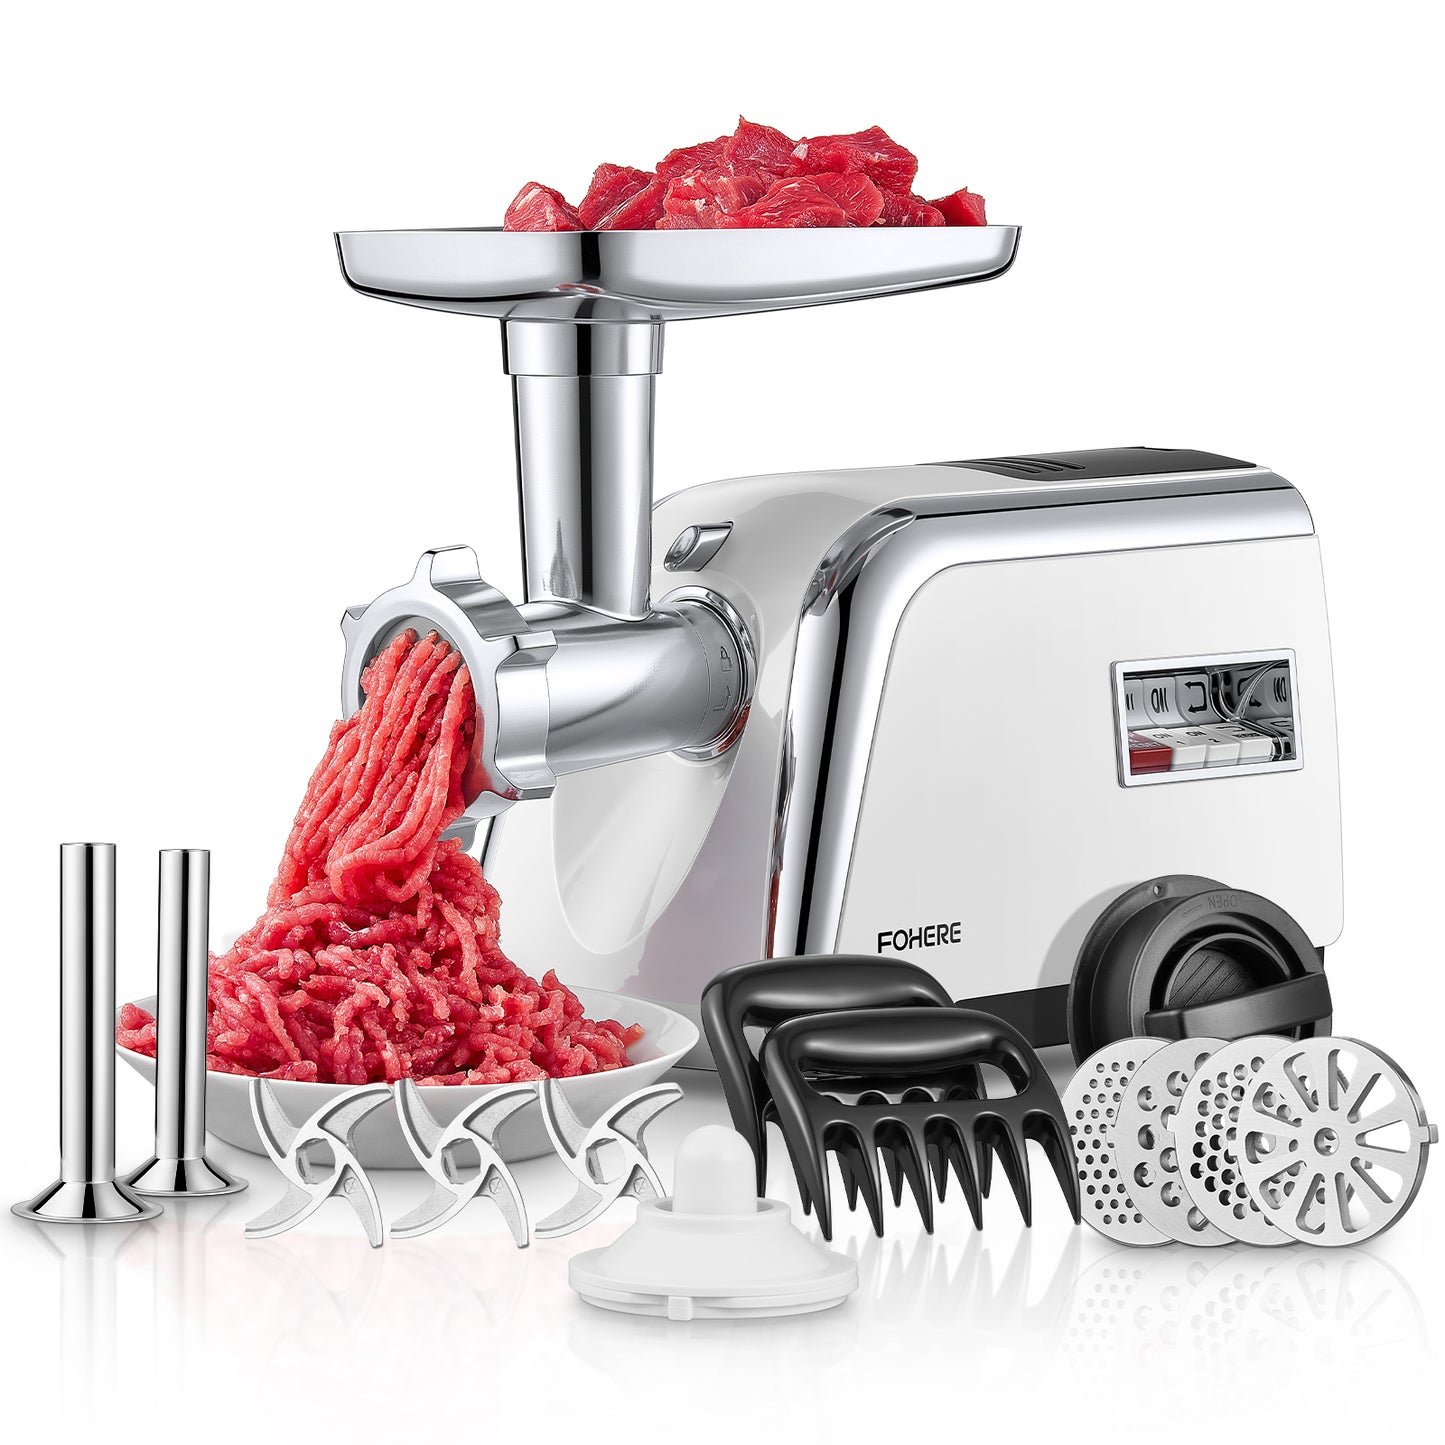 5 in1 Meat Grinder Heavy Duty with Sausage Stuffer (2 Sizes) • Kubbe Maker • Burger/Slider Maker • Meat Claws, Storage Box, Size #12, 4LB/min